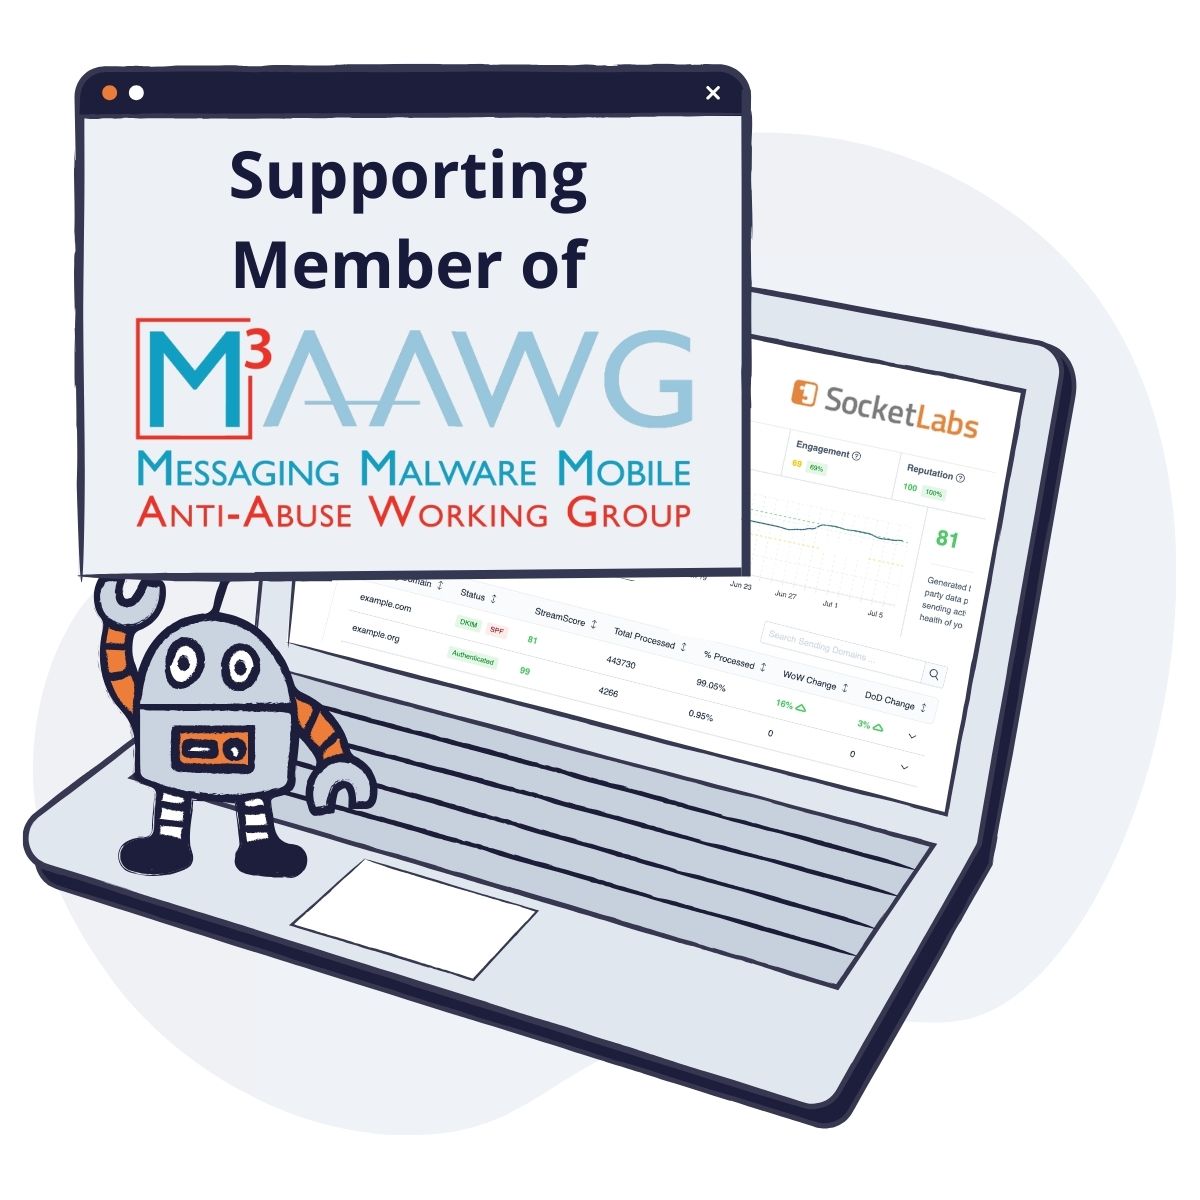 SocketLabs is a supporting member of M3AAWG.